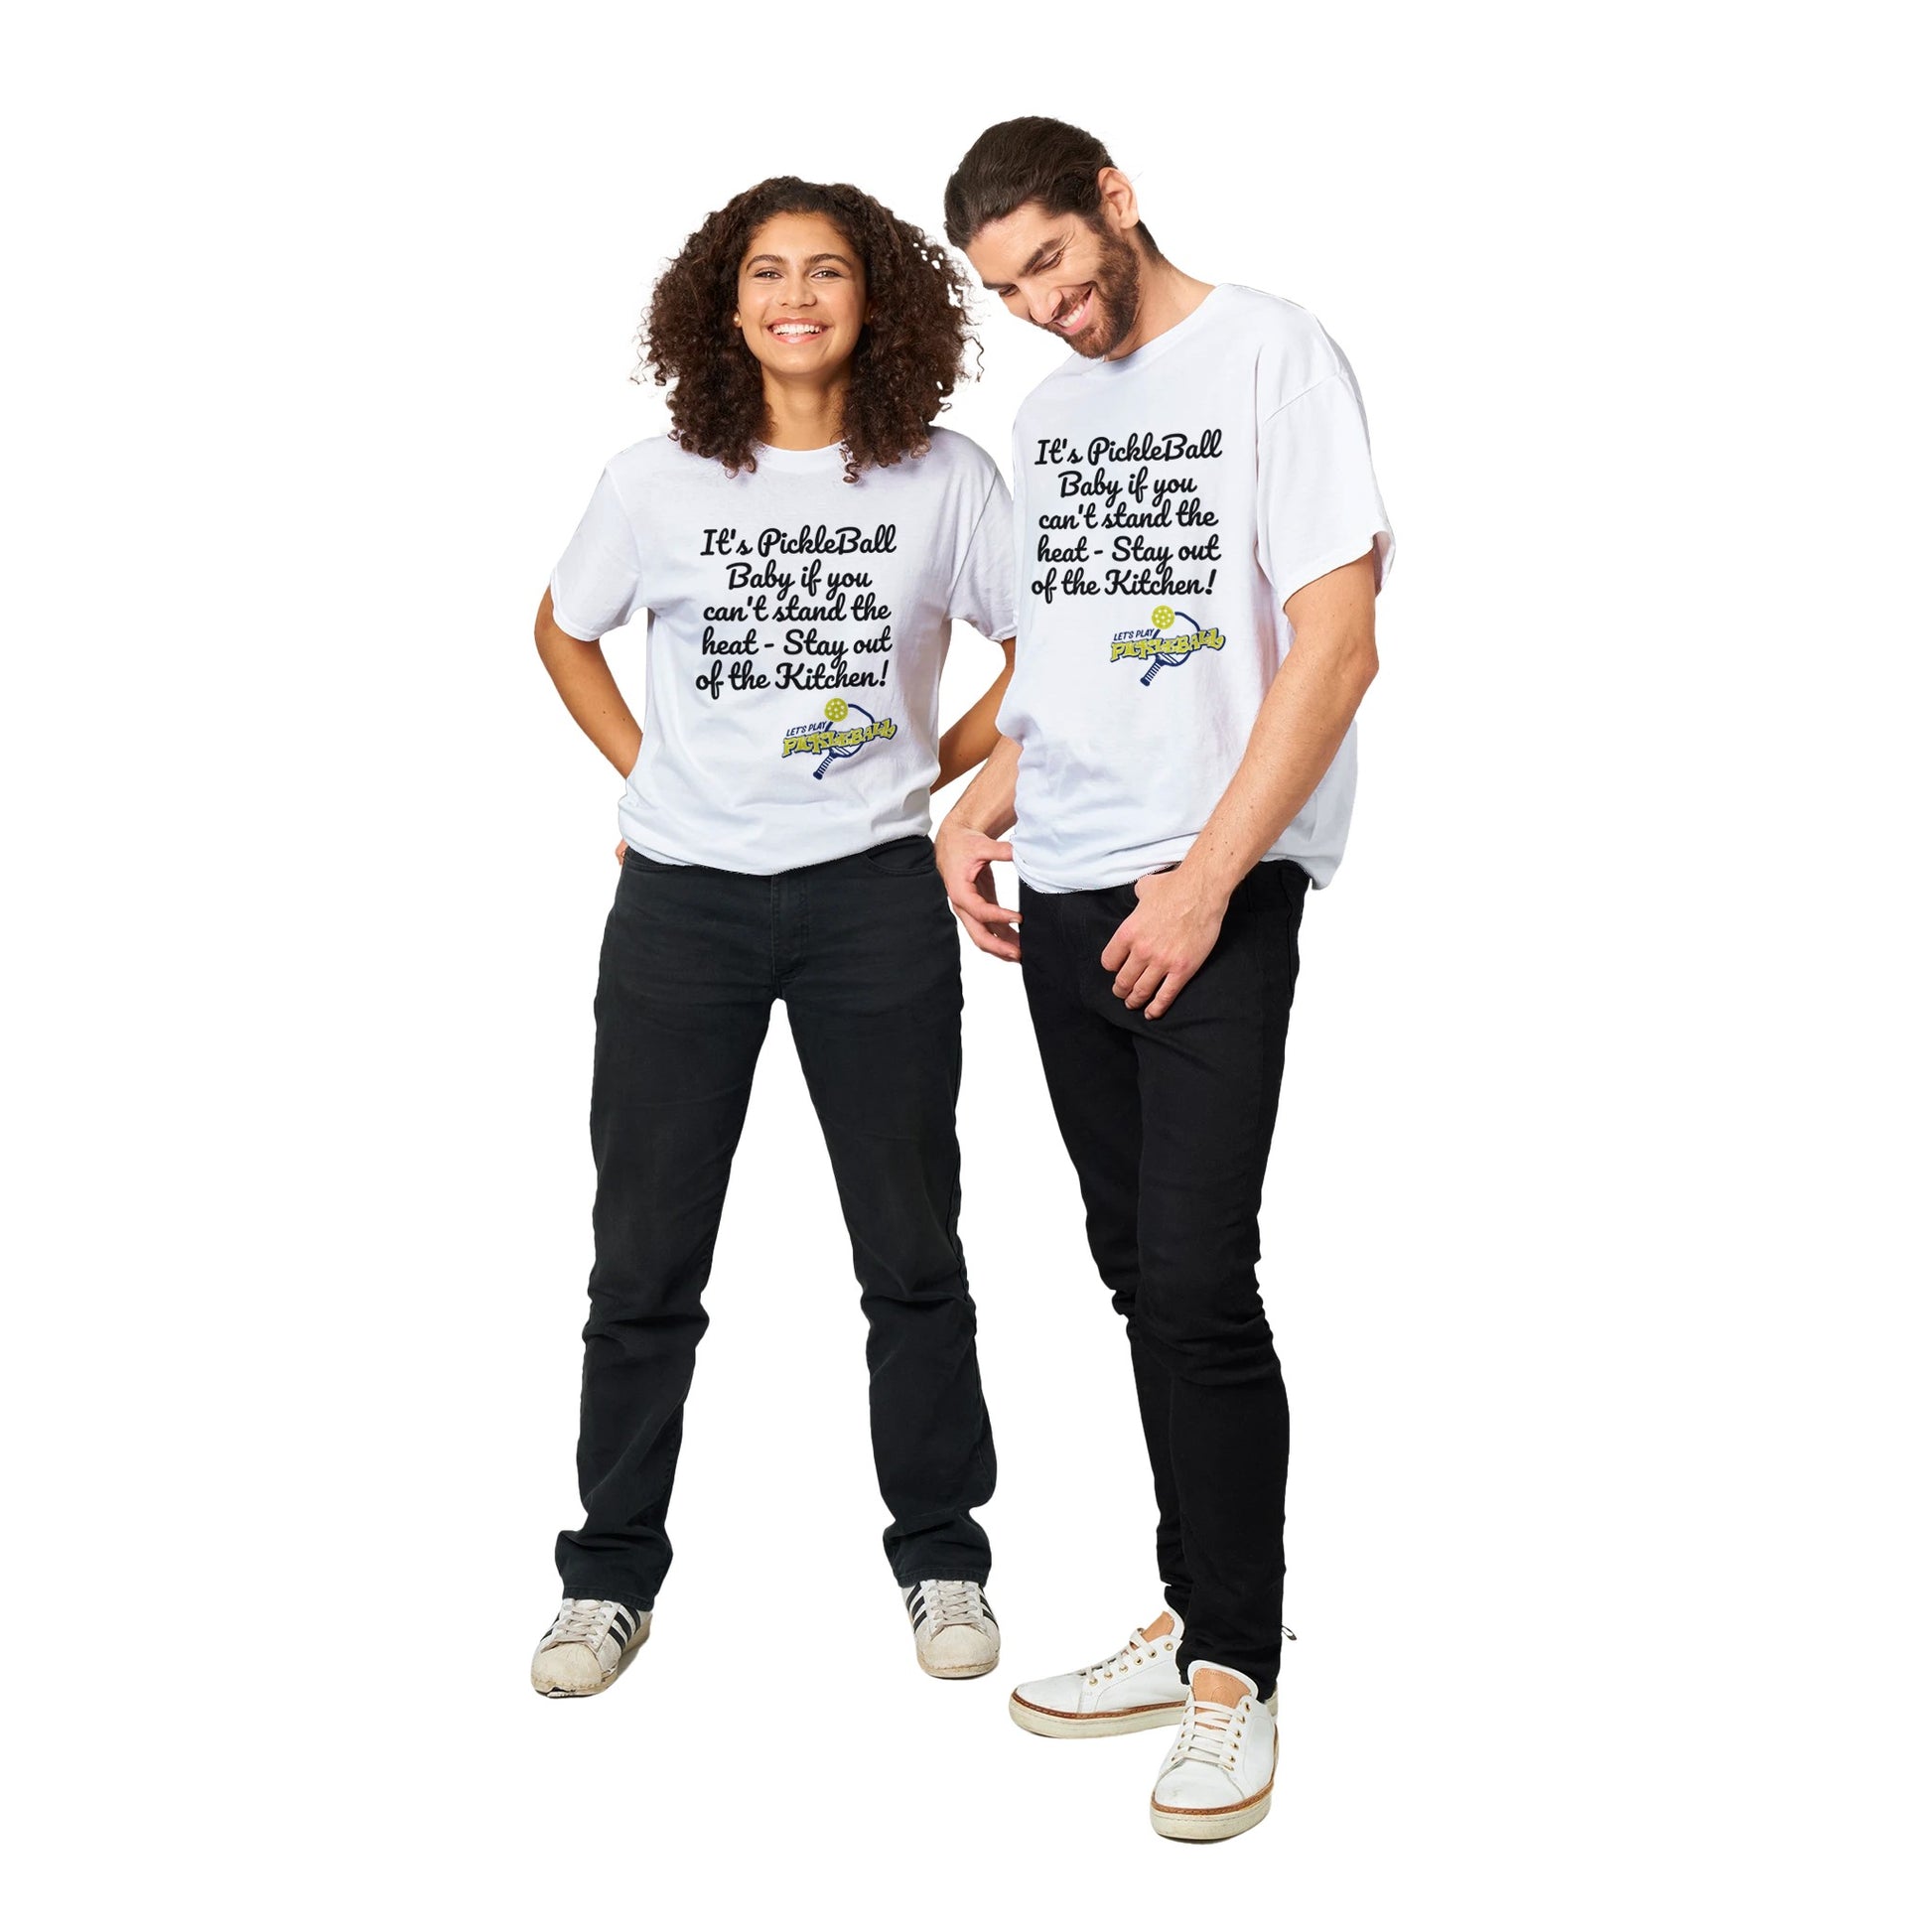 A white comfortable Unisex Crewneck heavyweight cotton t-shirt with funny saying It’s PickleBall Baby if can’t stand the heat – Stay out of the Kitchen!  and Let’s Play Pickleball logo on the front from WhatYa Say Apparel worn by Happy woman and man couple standing side by side.